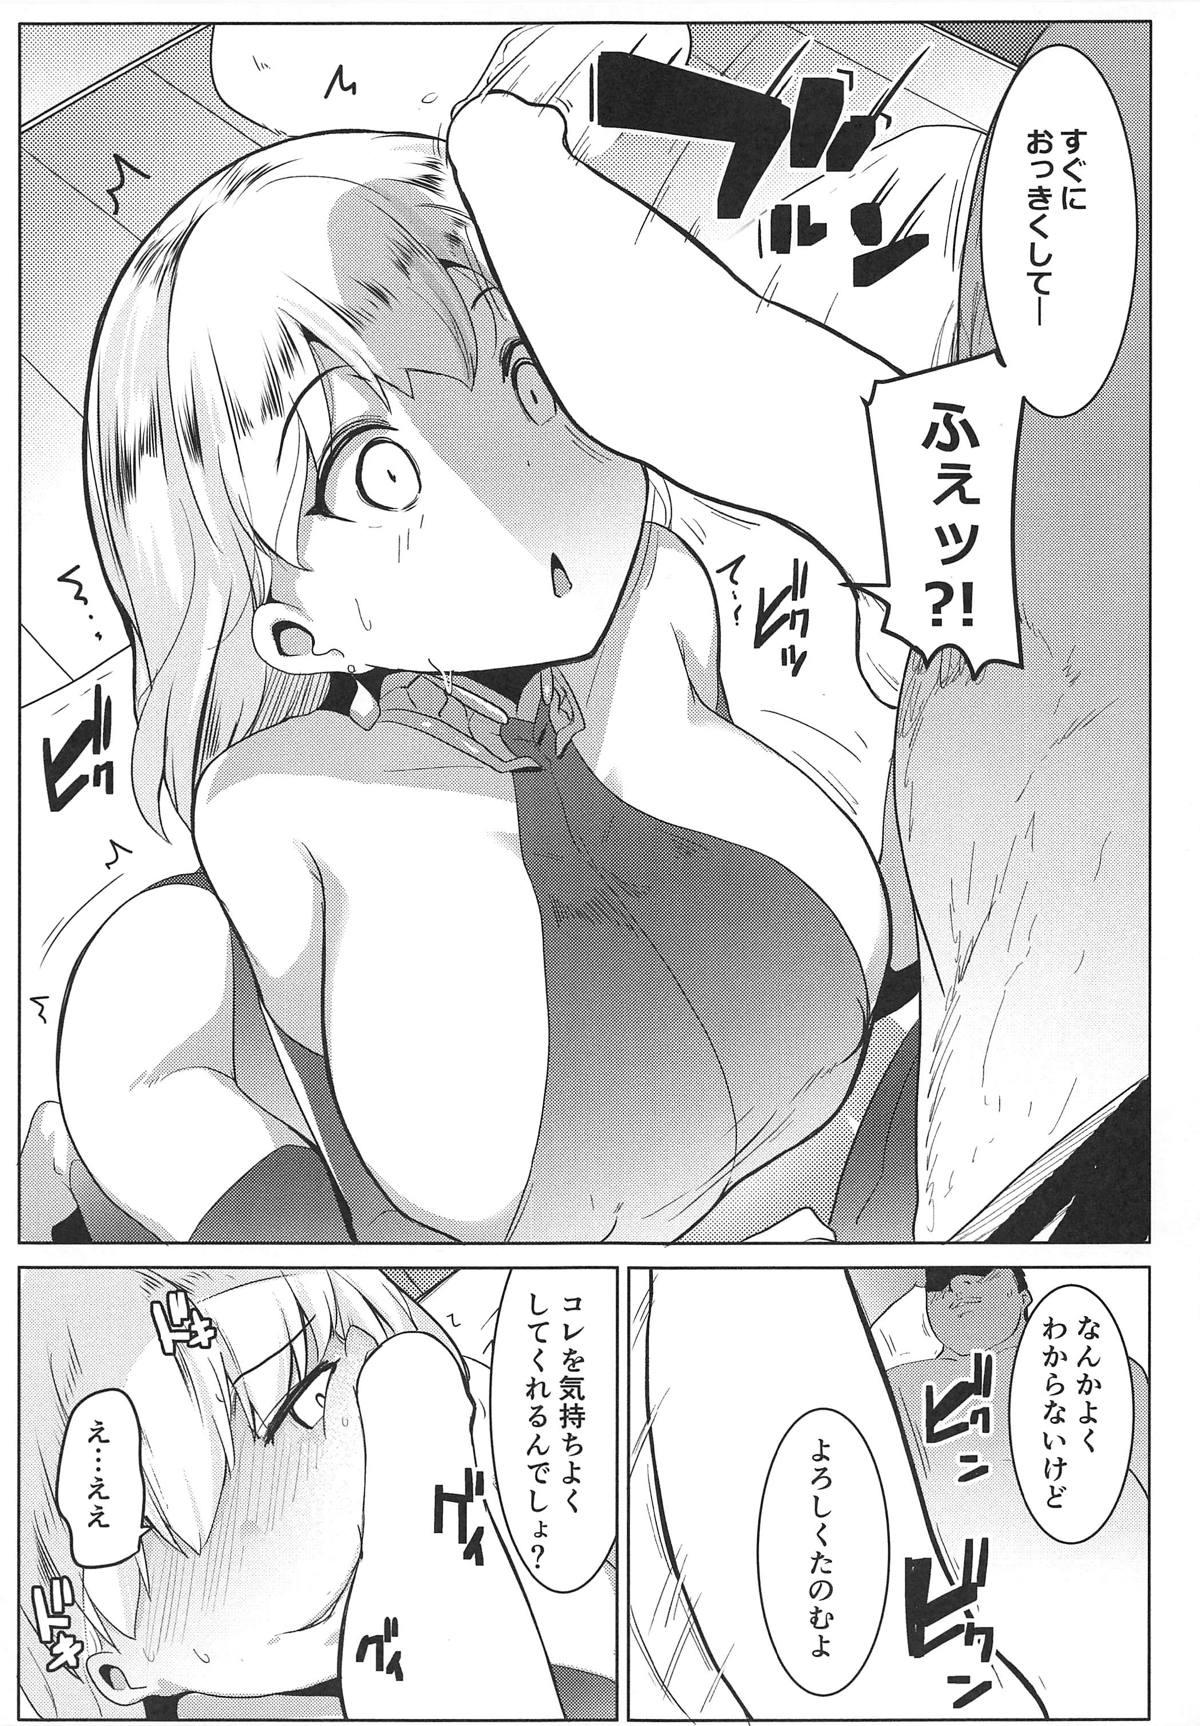 Blows Hame Kama - Fate grand order Cam Girl - Page 8